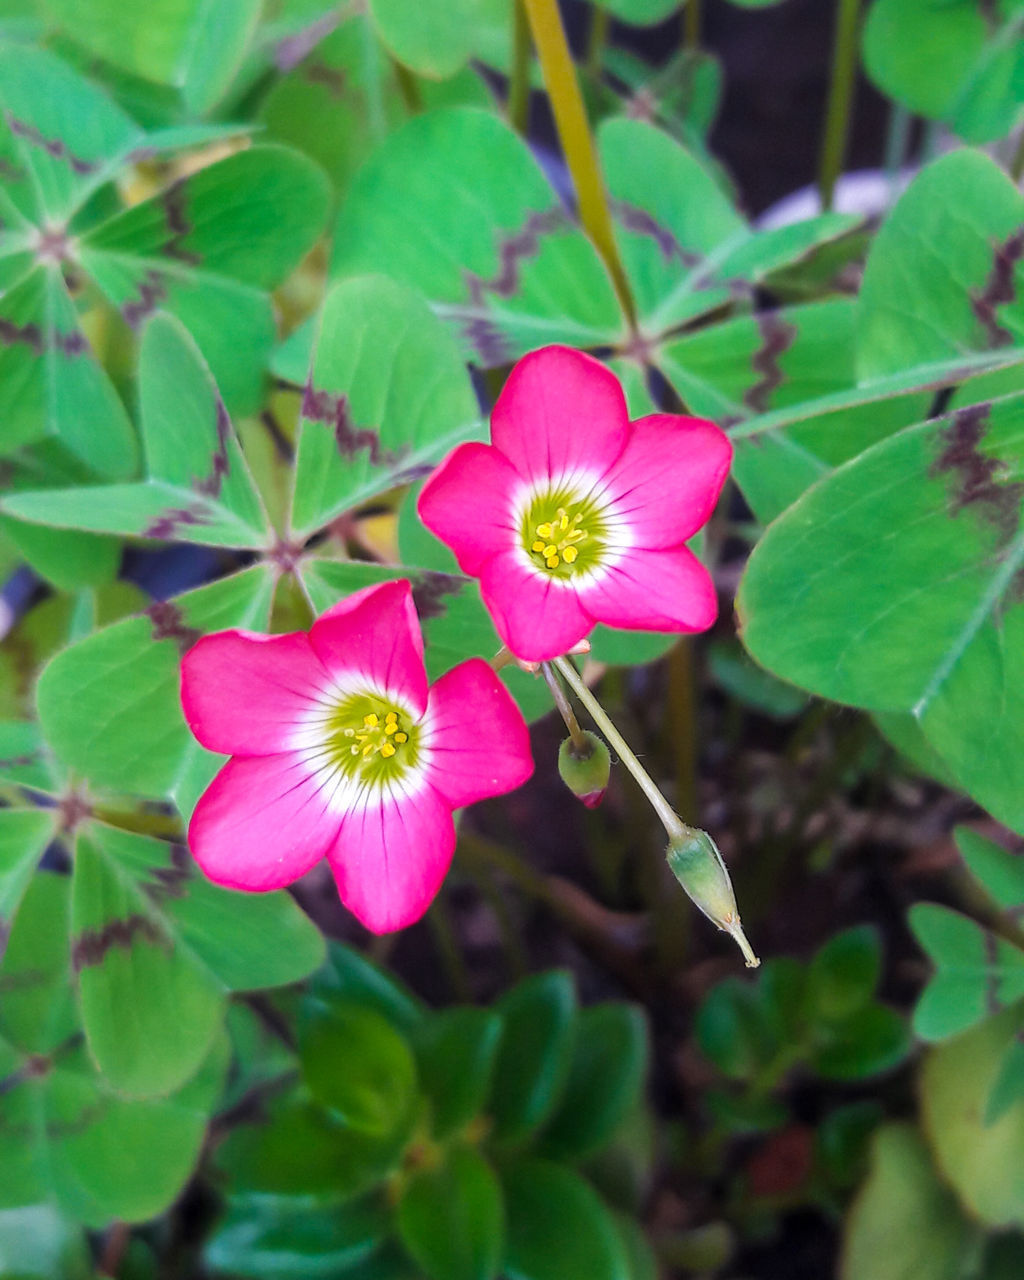 CLOSE-UP OF PINK FLOWERING PLANTS